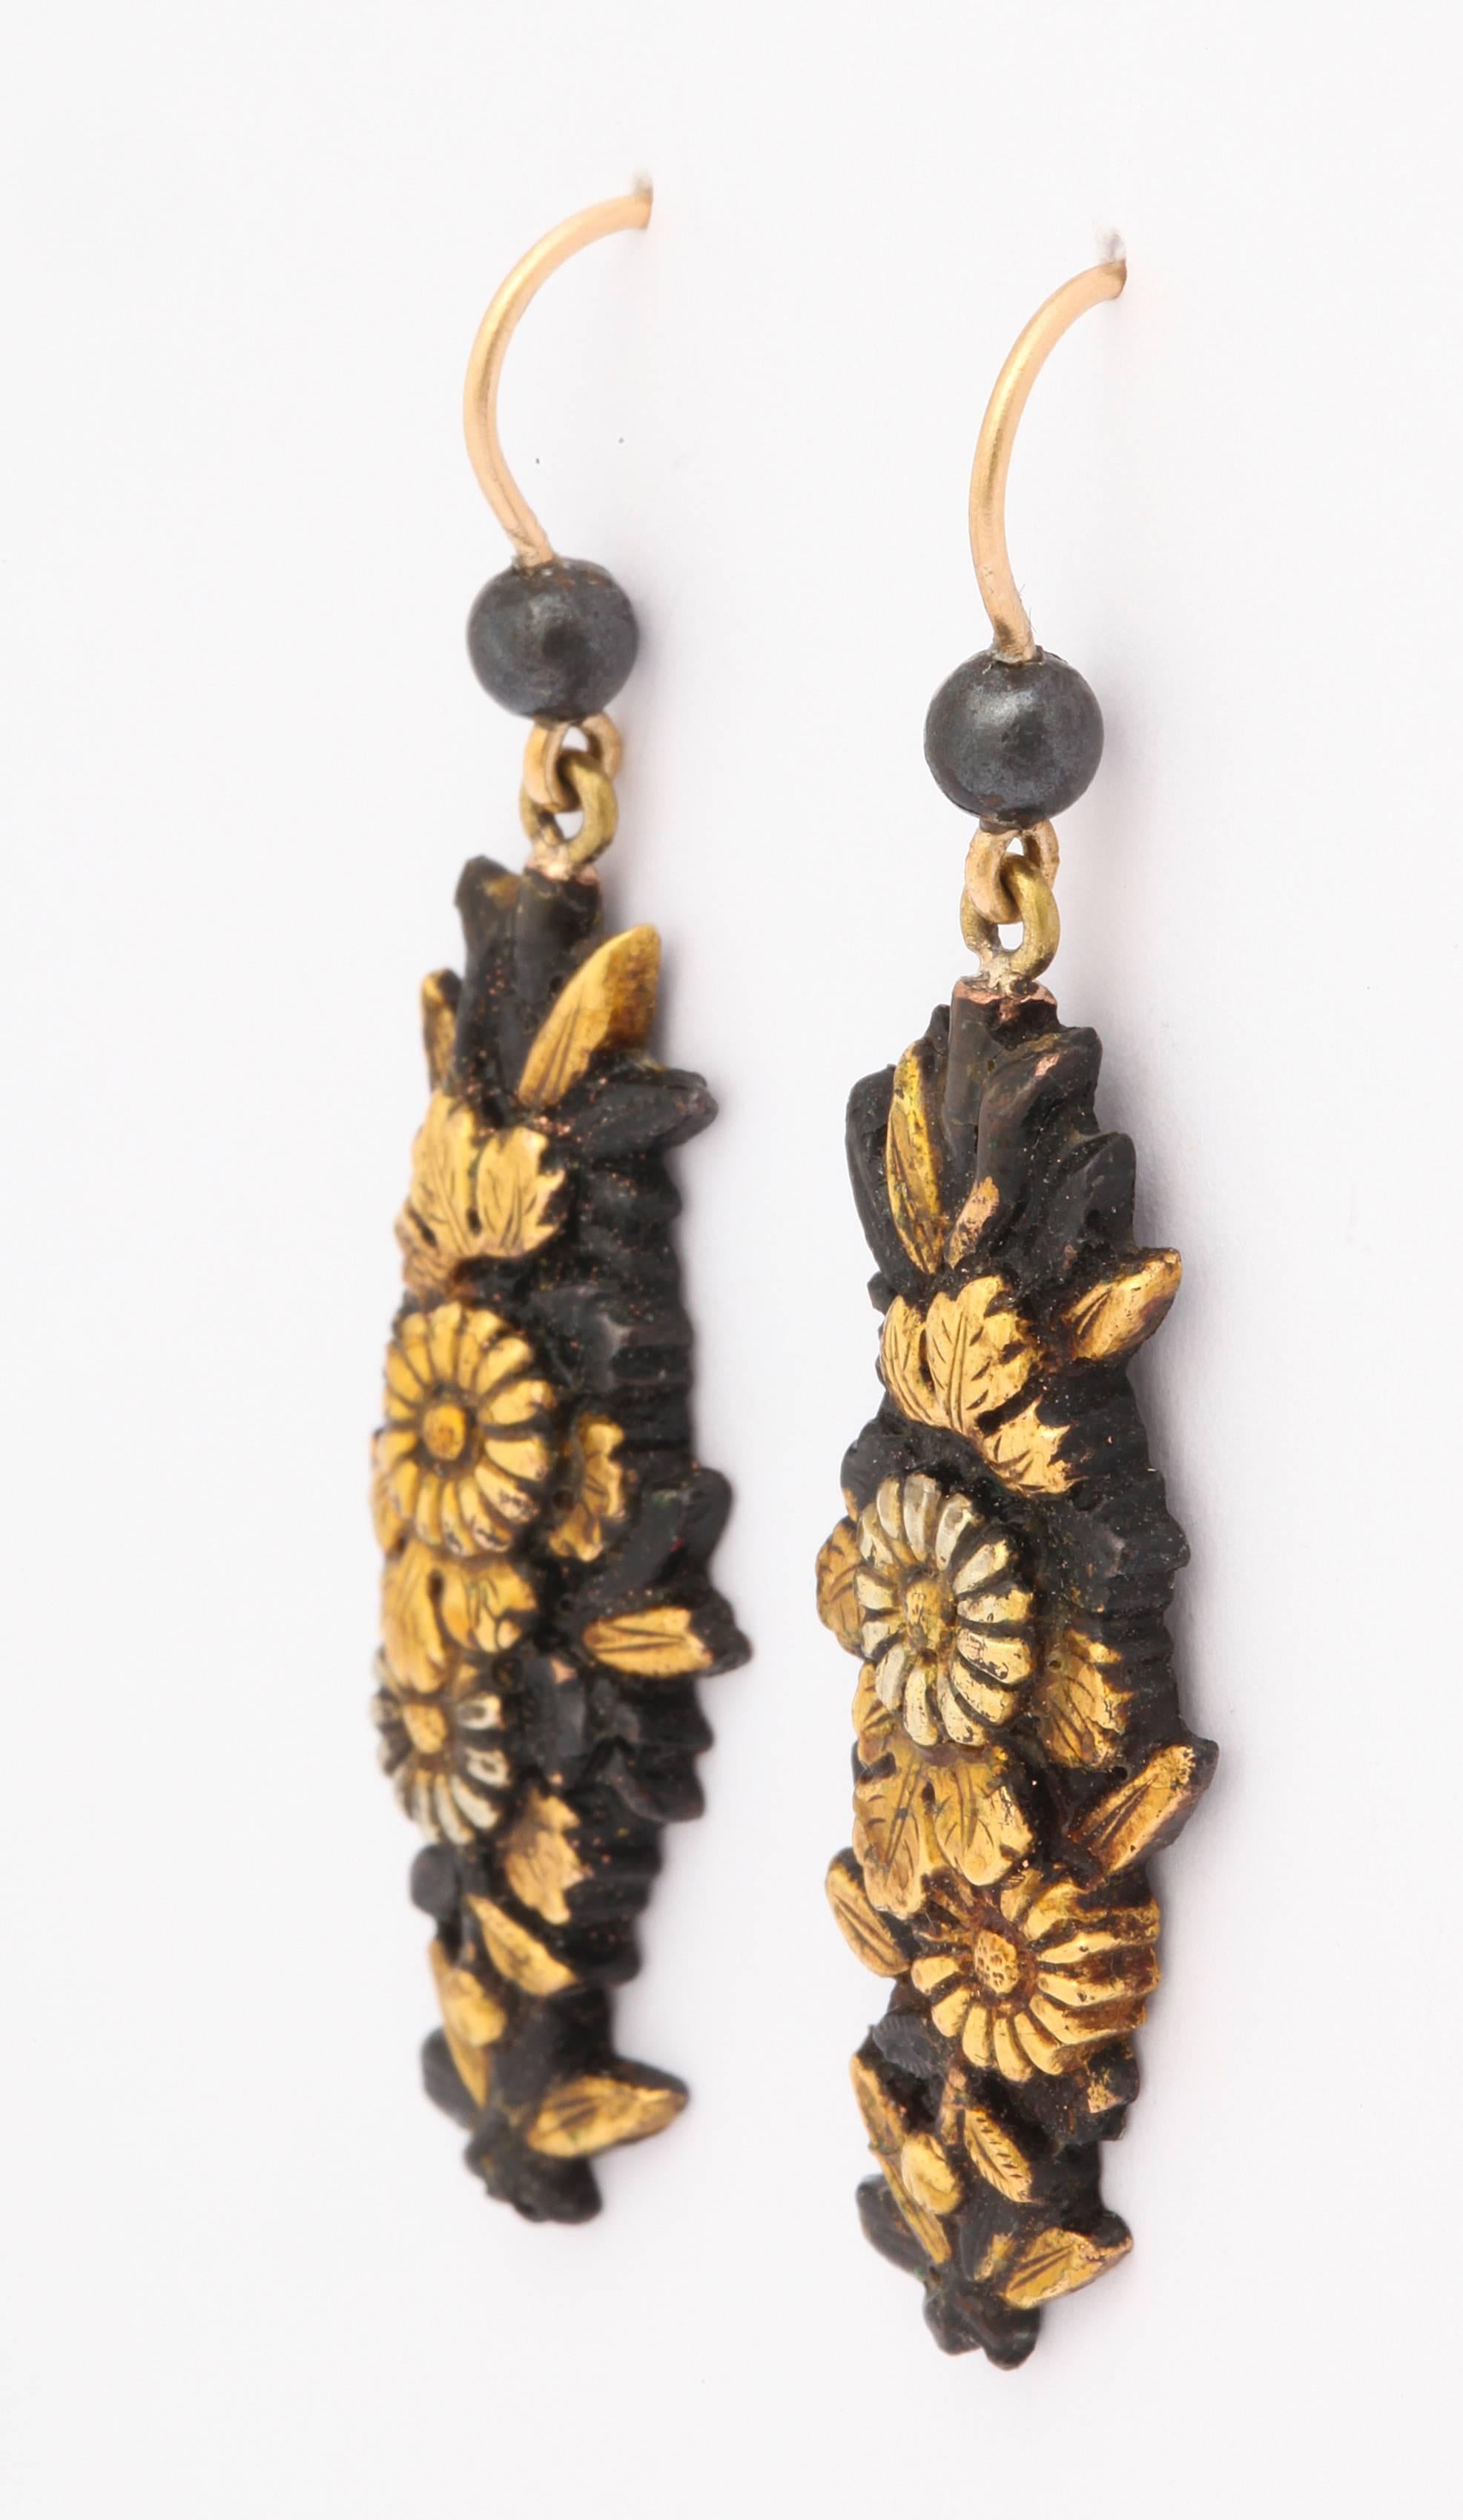 The Japanese esthetic that revered natures' wonders blooms in a pair of shakudo metal and gold earrings circa 1870 after Commodore Perry opened trade with Japan. The earrings are small chandelier or dangling forms covered with daisies.  Original to